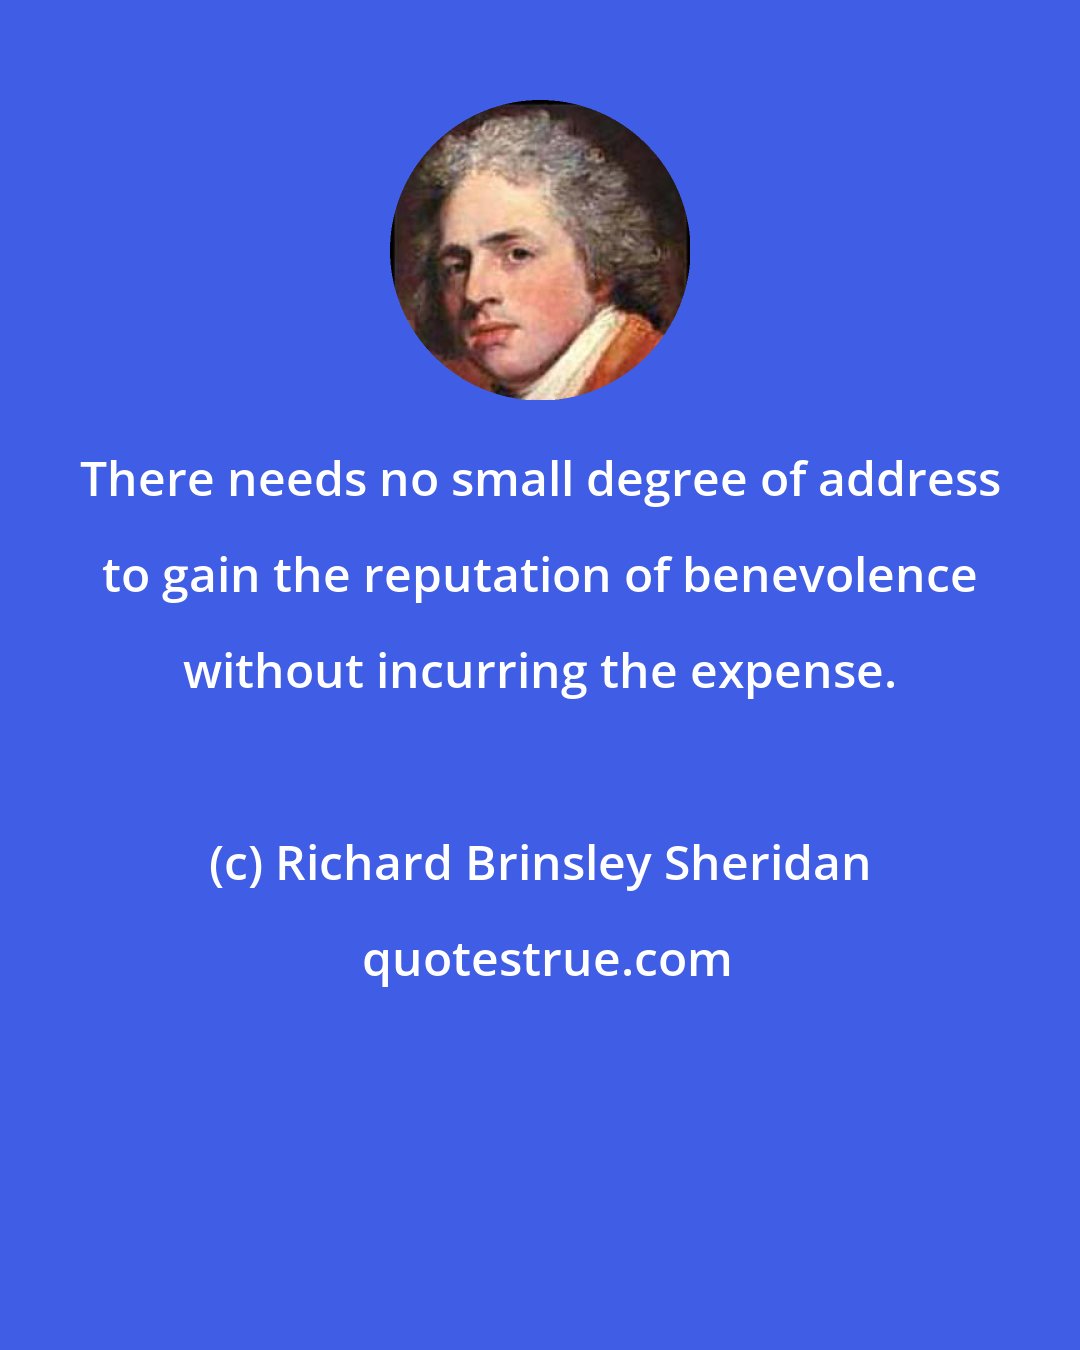 Richard Brinsley Sheridan: There needs no small degree of address to gain the reputation of benevolence without incurring the expense.